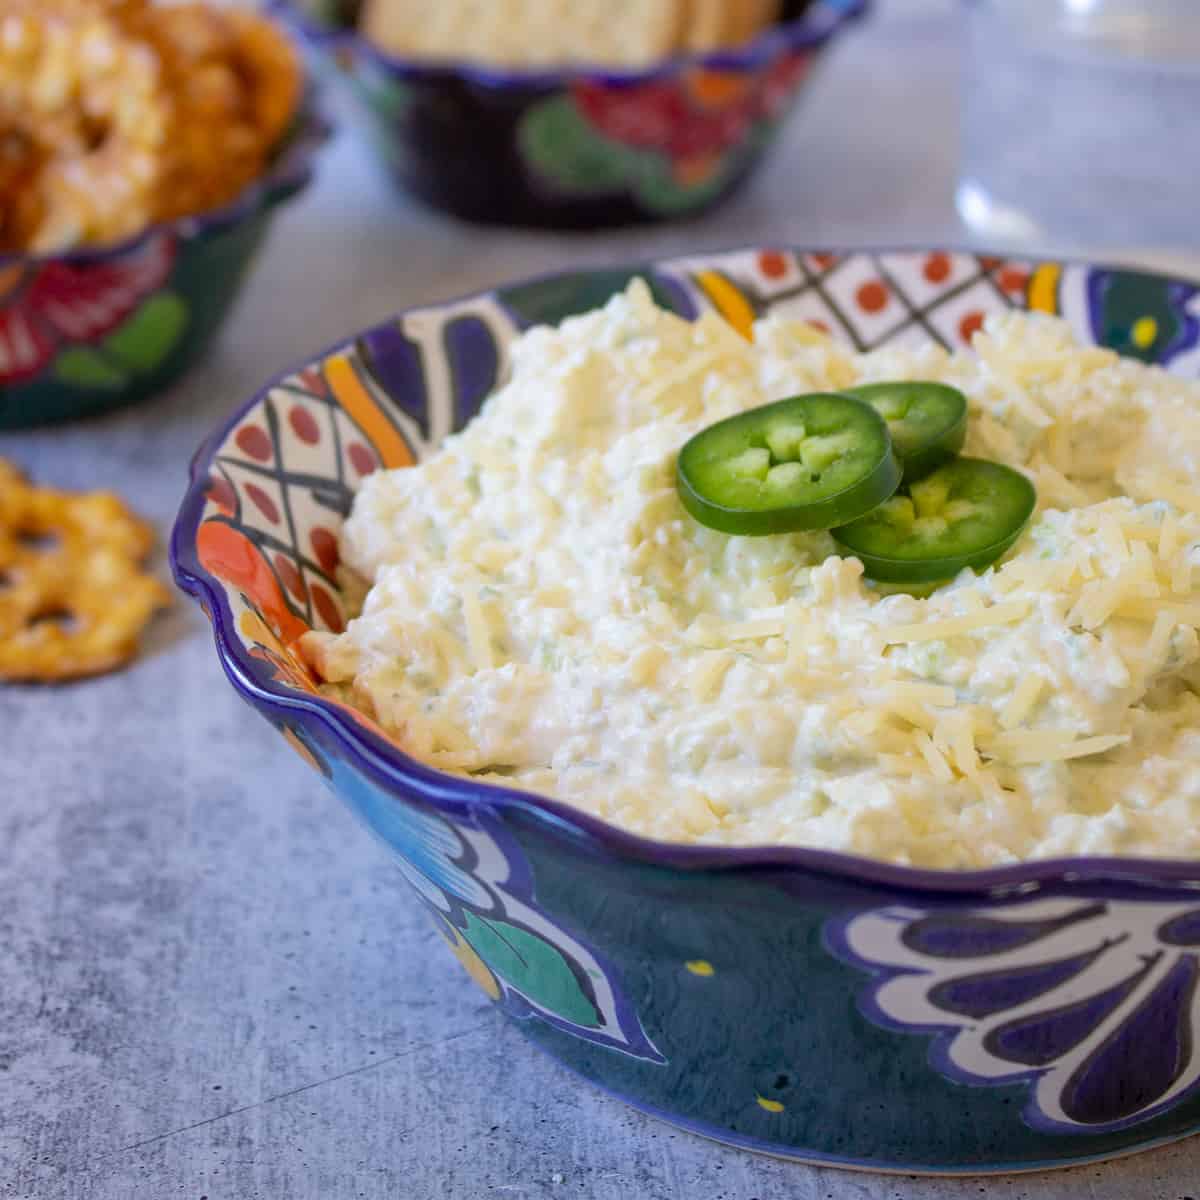 Artichoke dip topped with sliced jalapenos in a colorful bowl.